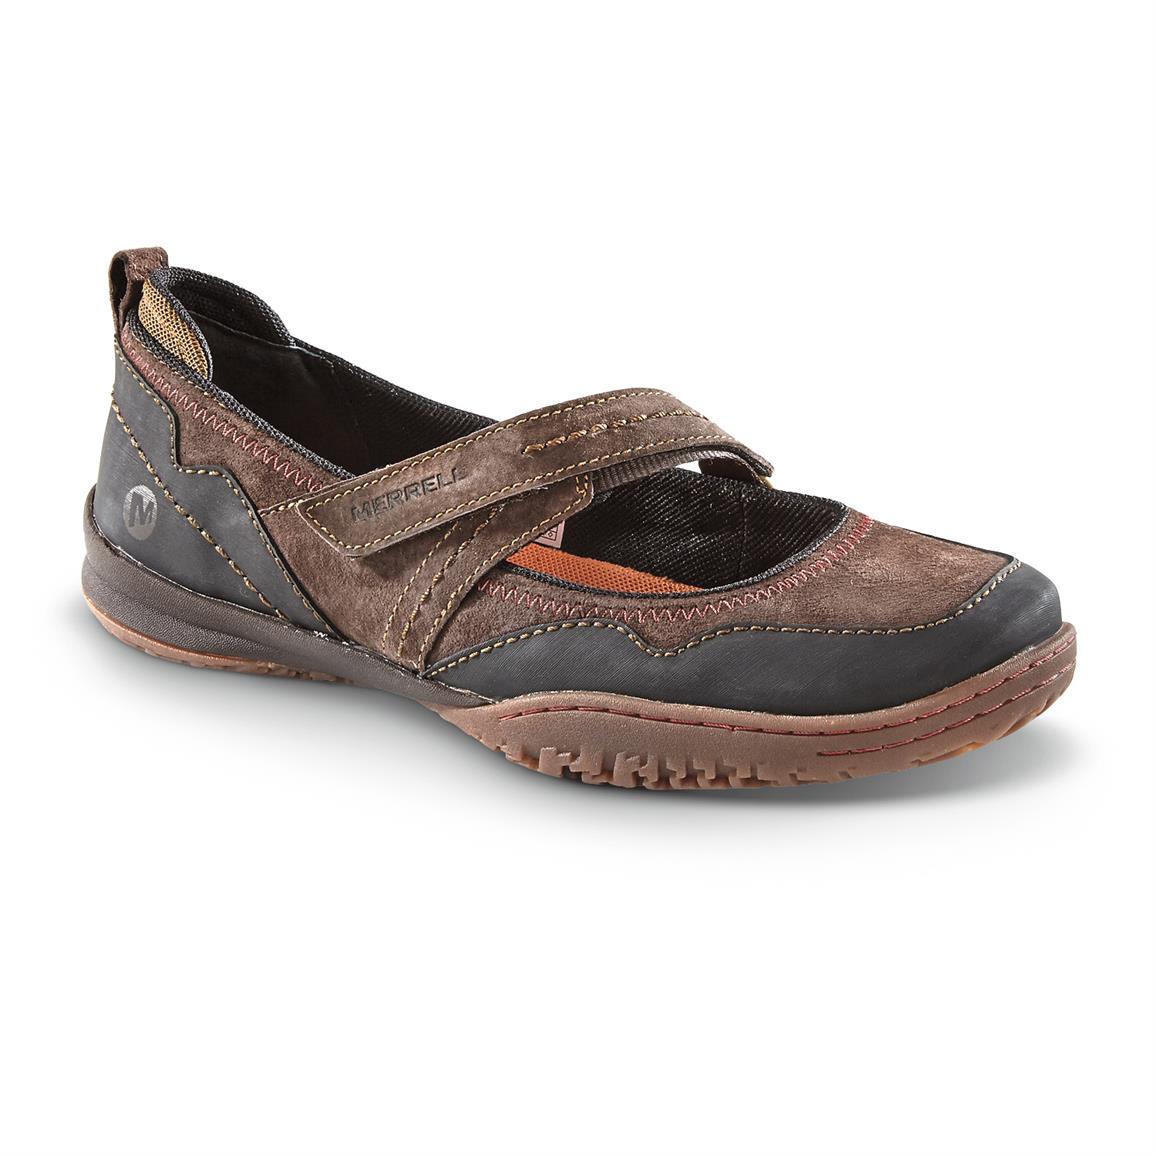 Merrell Women's Albany Mary Jane Shoes - 662961, Casual Shoes at ...